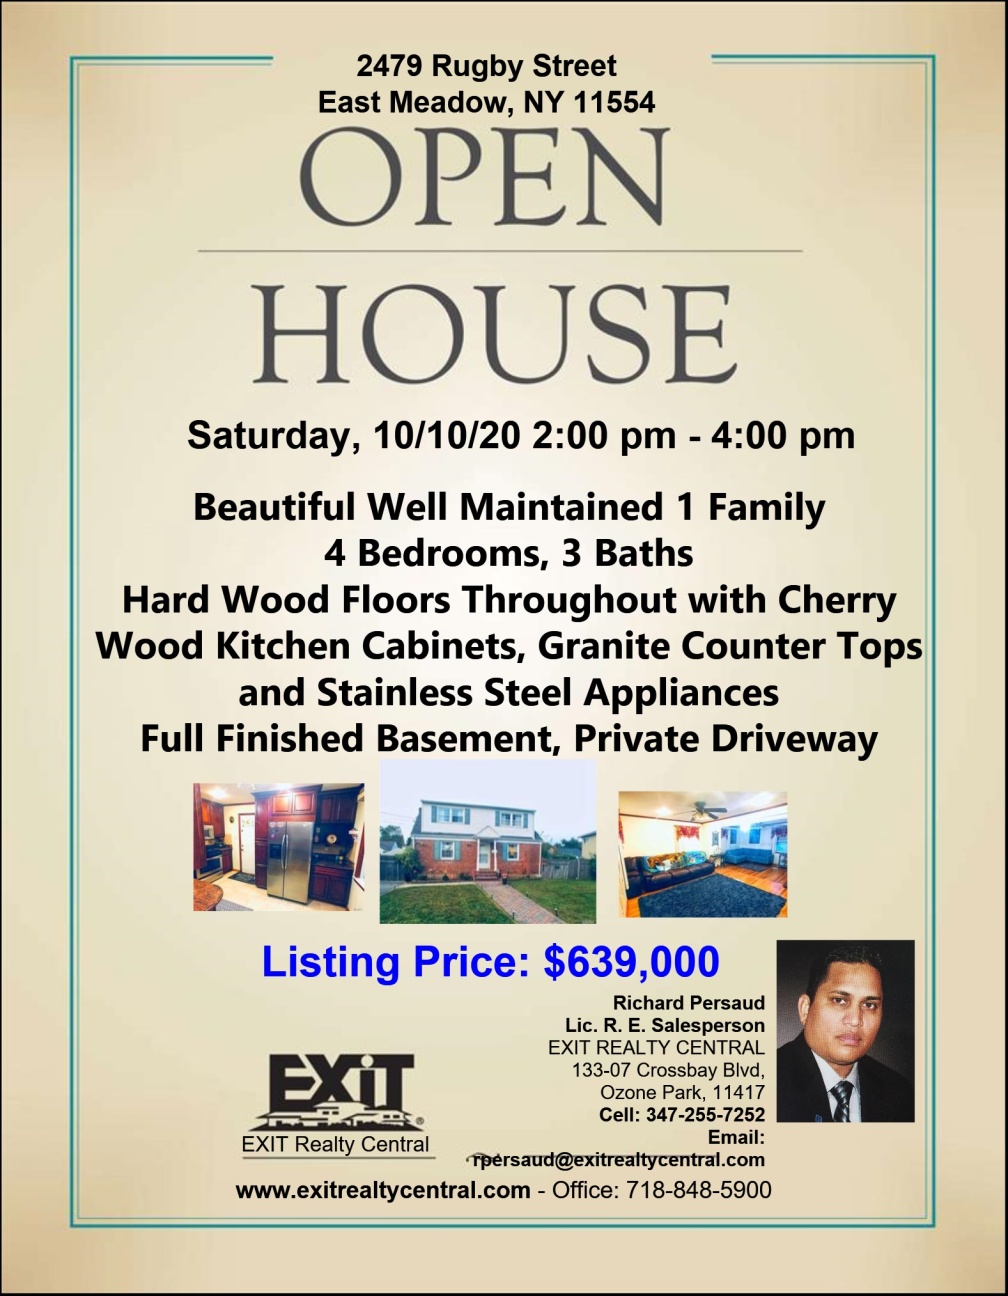 Open House in East Meadow, 10/10/20 2-4pm